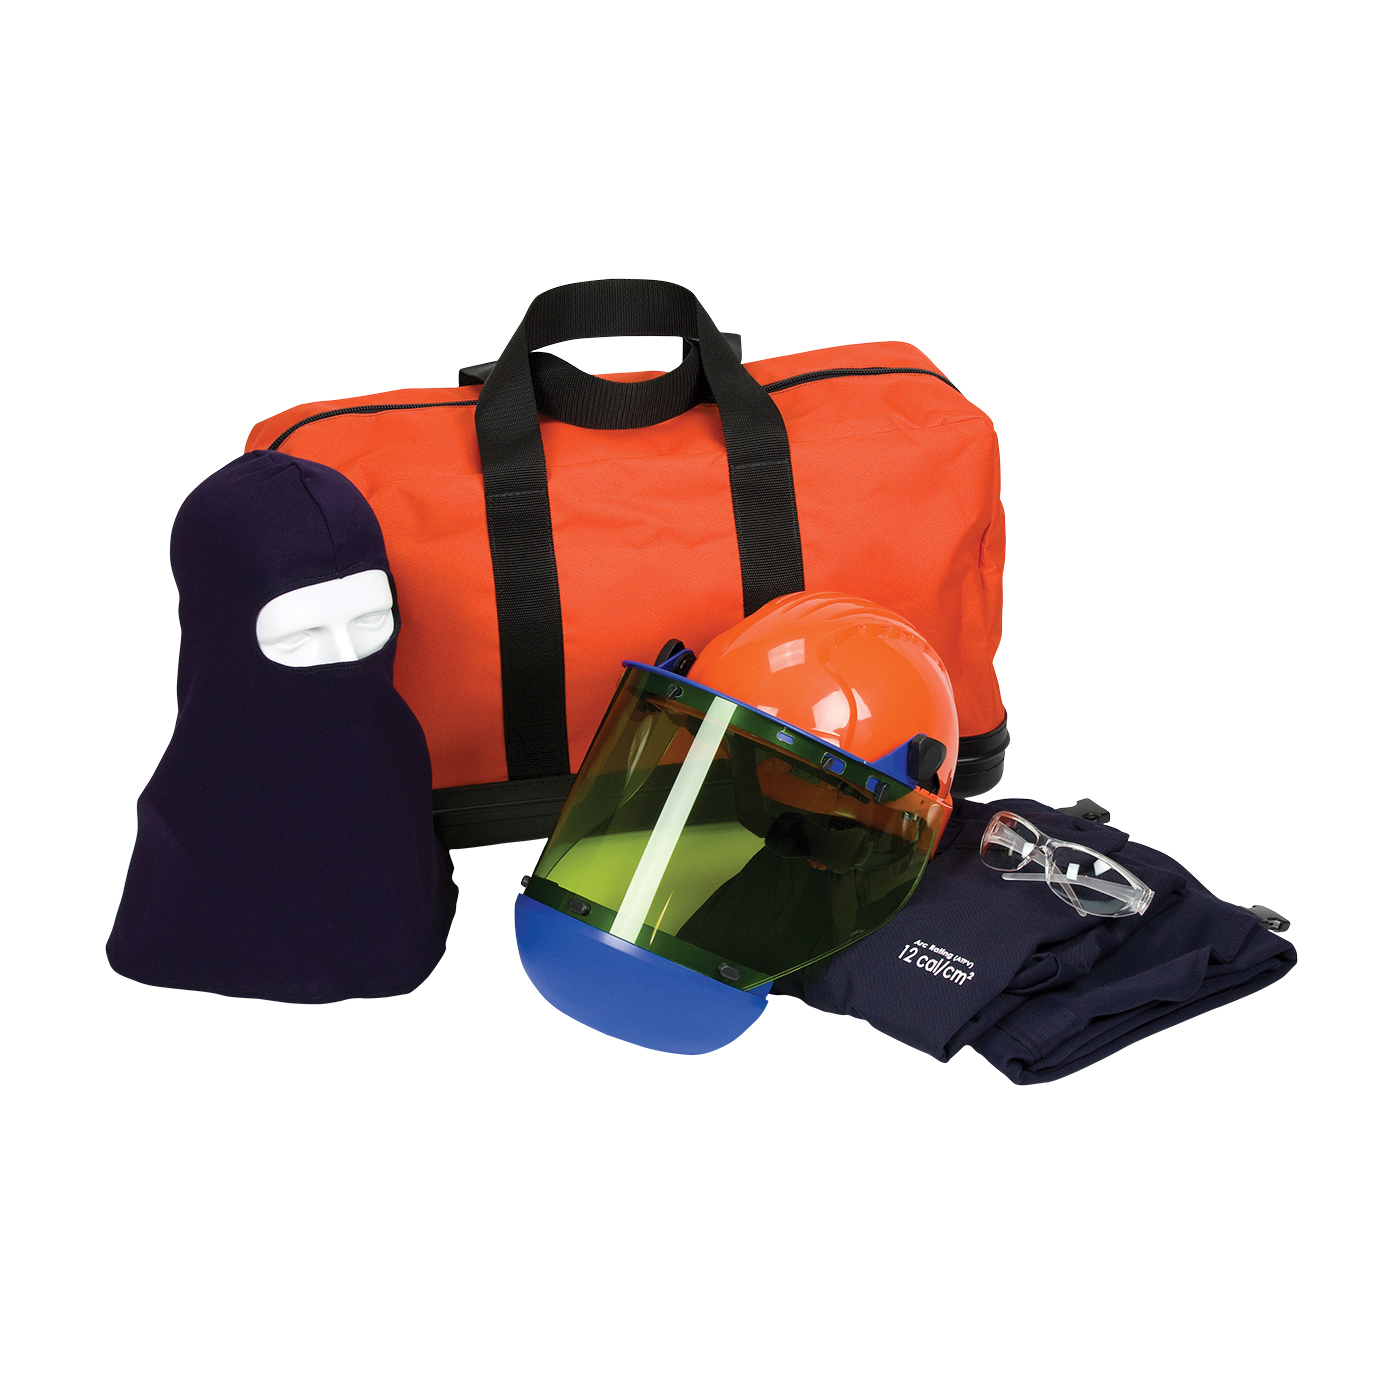 PIP® 9150-52810/4X Arc Flash Kit, Hazard Risk Category (HRC): 2, Hood/Face Shield Max Arc Flash Protection: 12 cal/sq-cm, Garment Max Arc Flash Protection: 12 cal/sq-cm, Specifications Met: NFPA 70E-2018, Arc Shield/Hard Hat Head/Face Protection